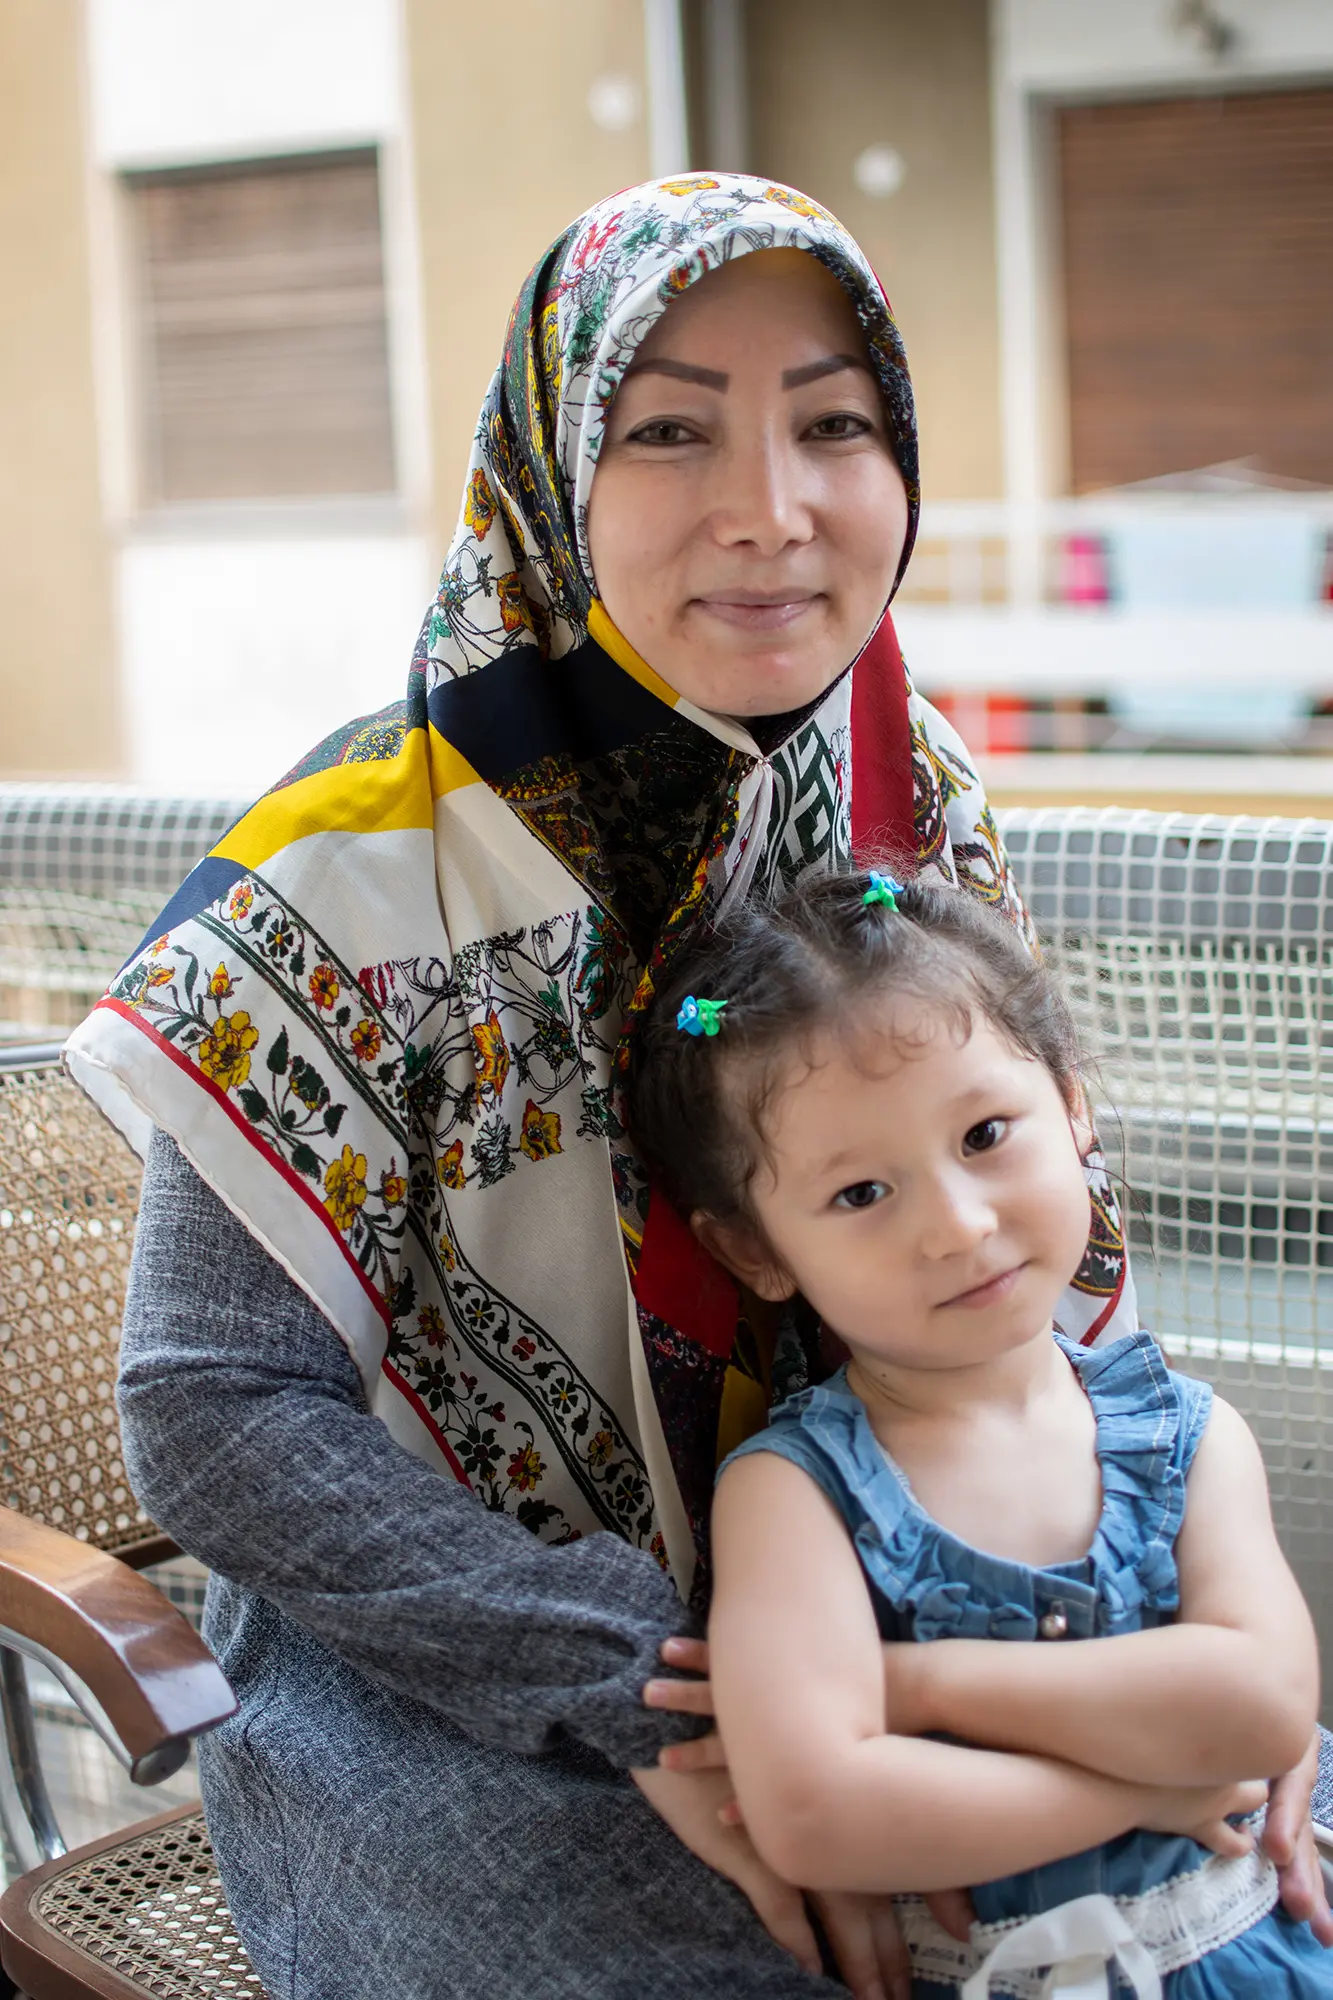 29-year old Fatimah Hosseini and her child